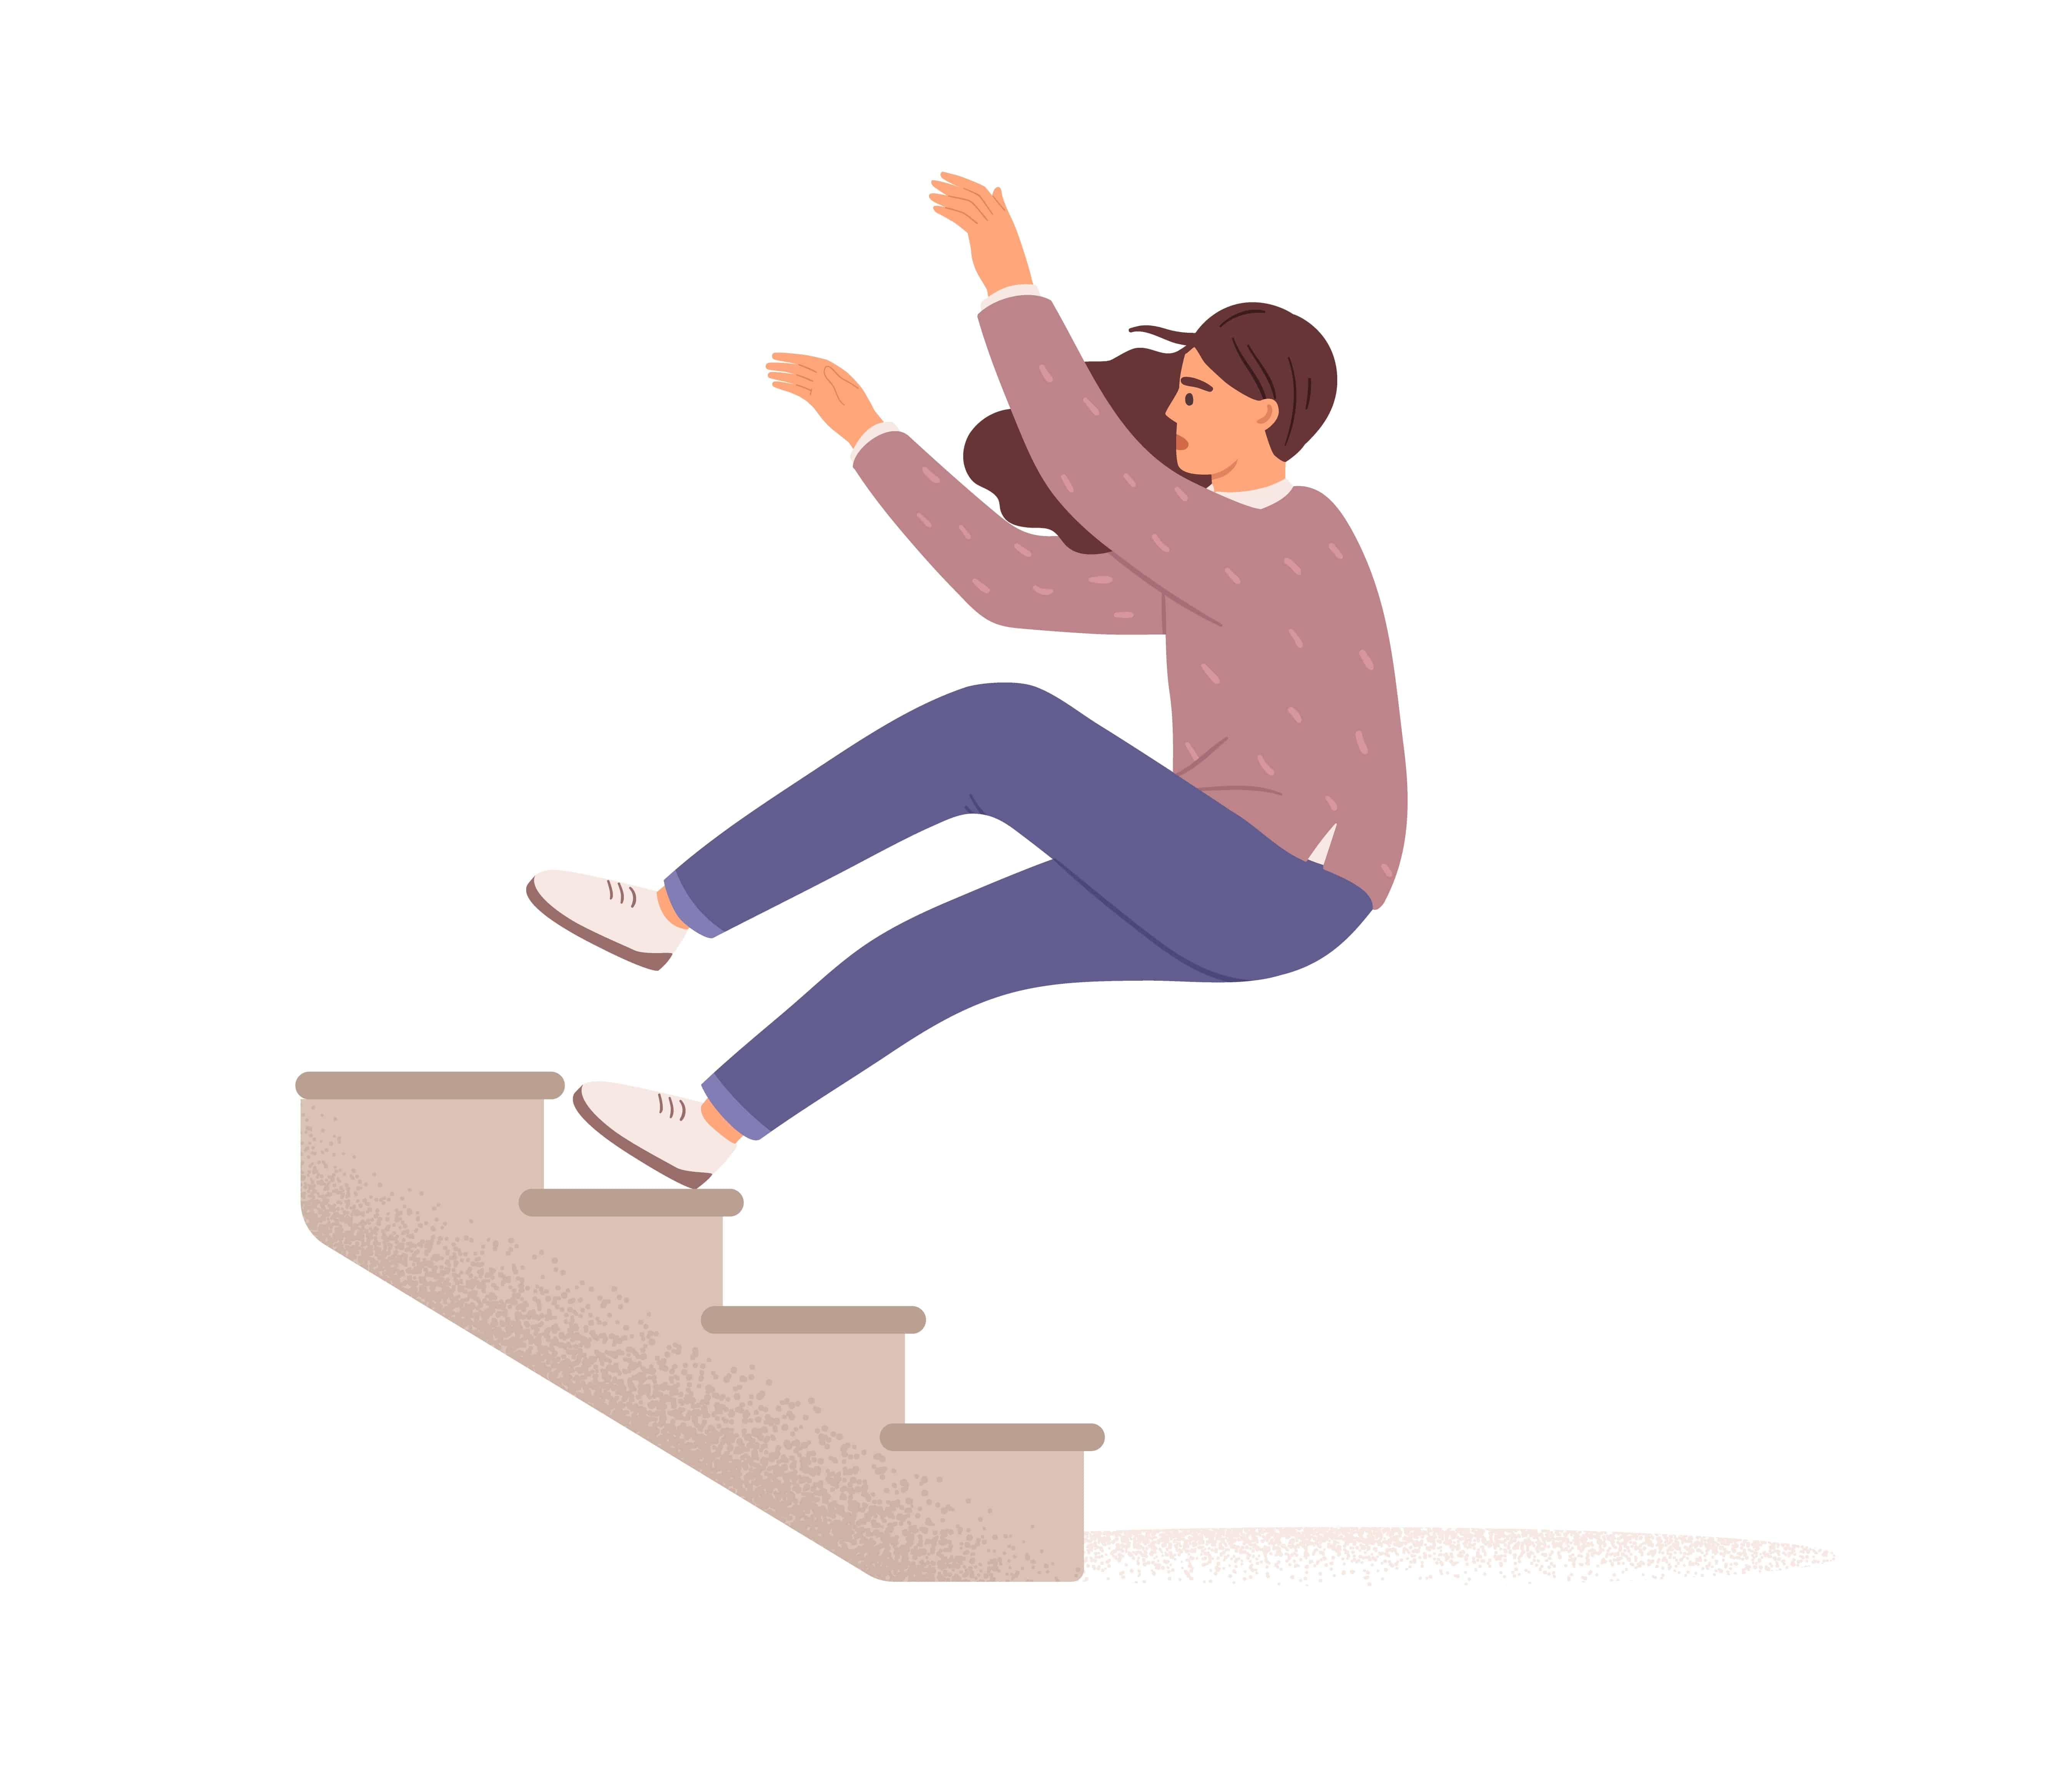 https://www.llinjury.com/previews/injuries-from-falling-down-stairs-lawyer-help.jpeg